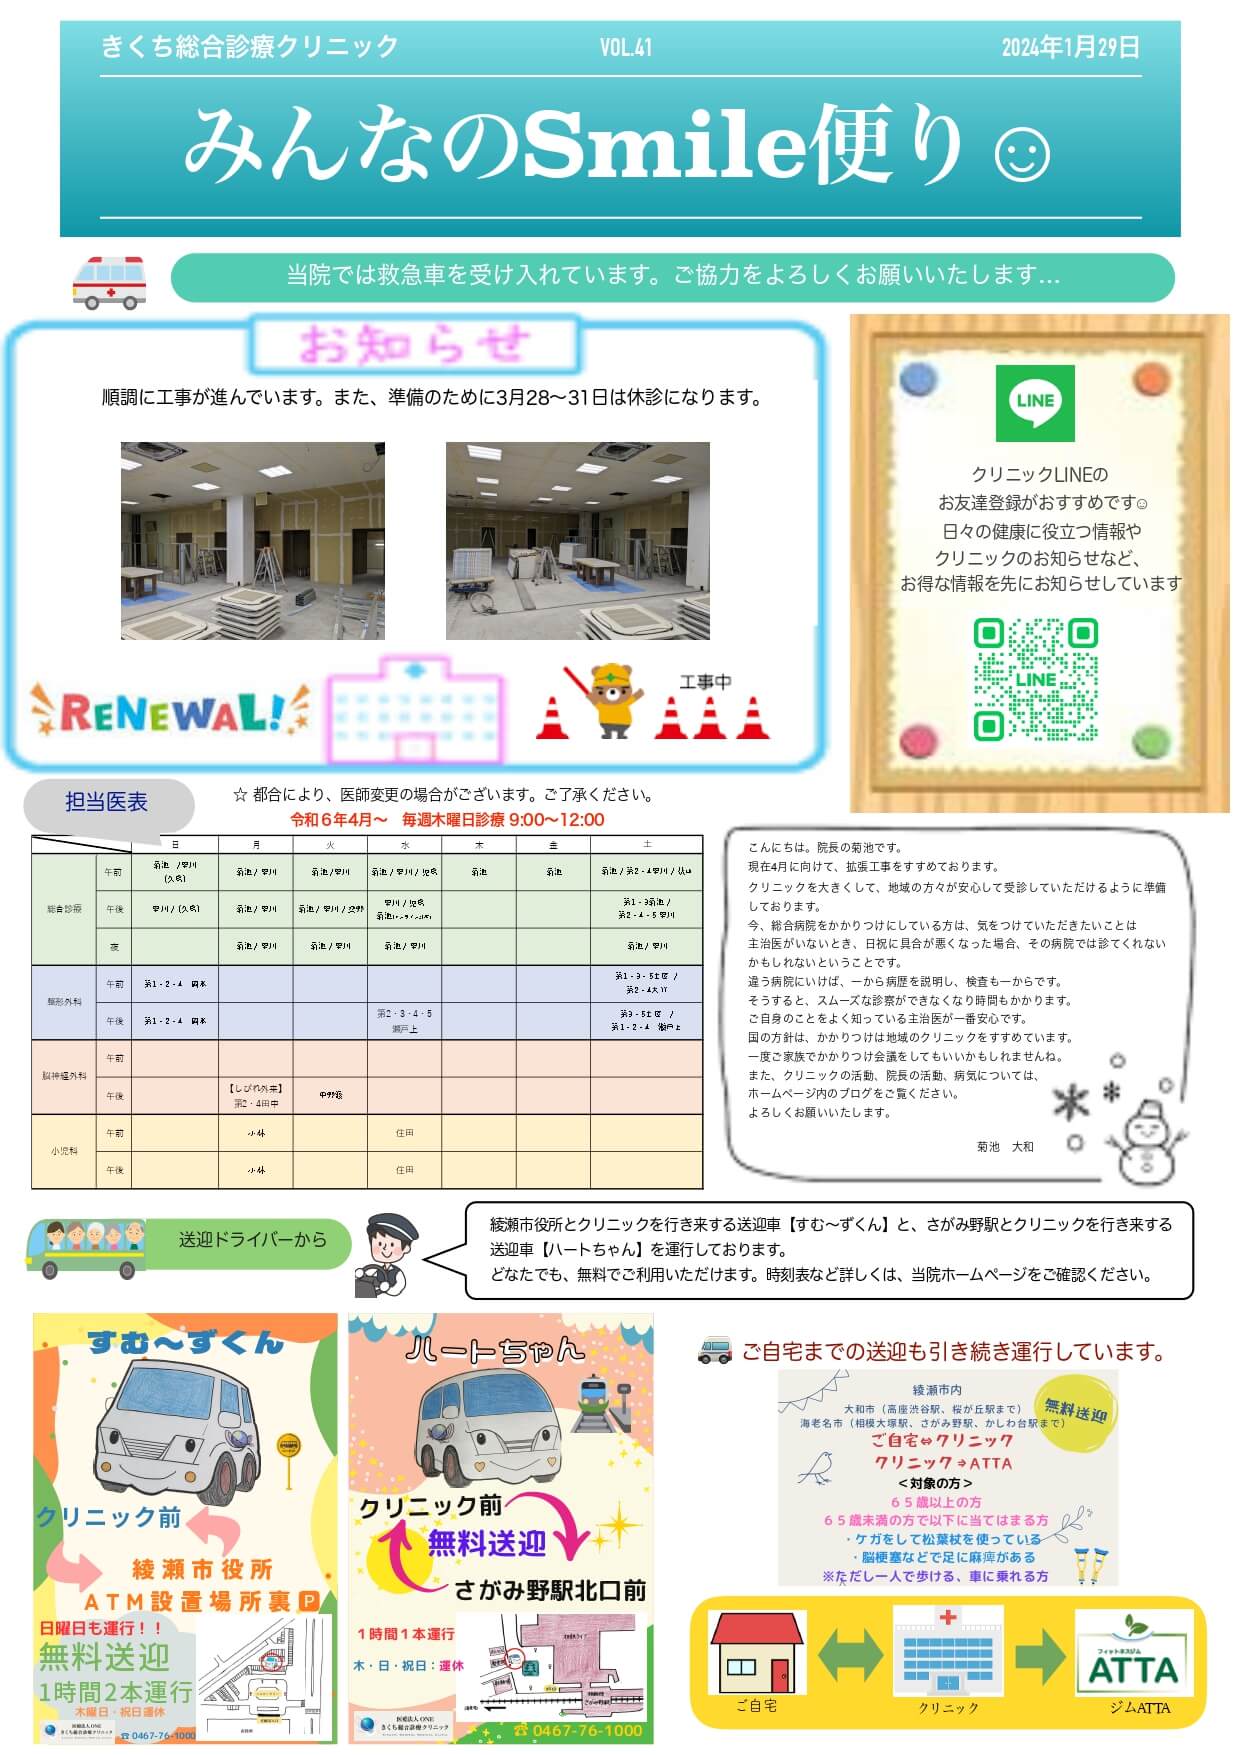 smaile便りvol.41